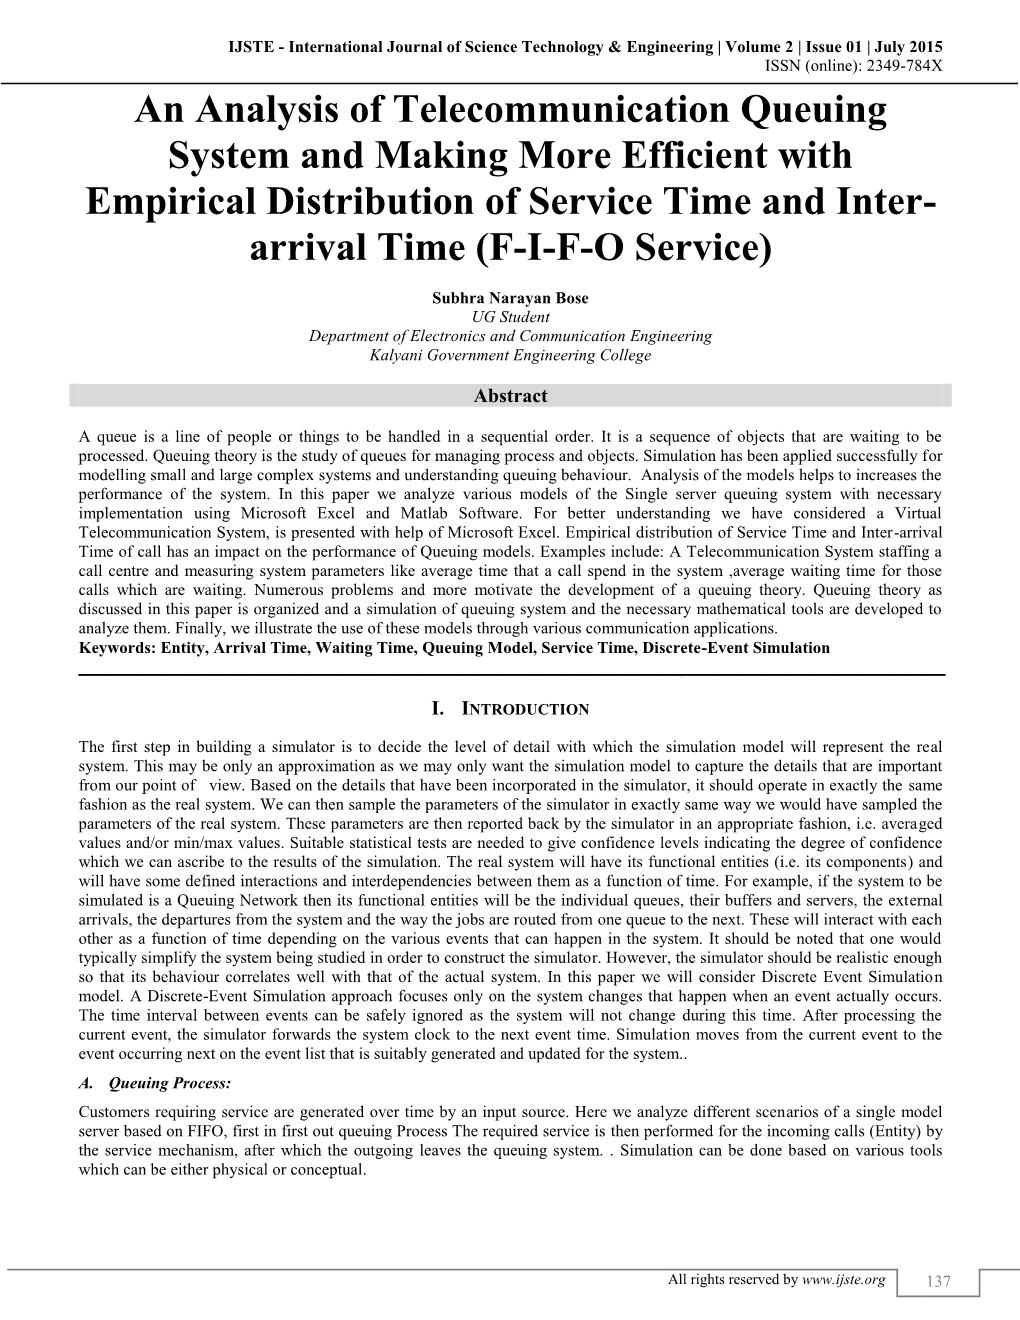 An Analysis of Telecommunication Queuing System and Making More Efficient with Empirical Distribution of Service Time and Inter